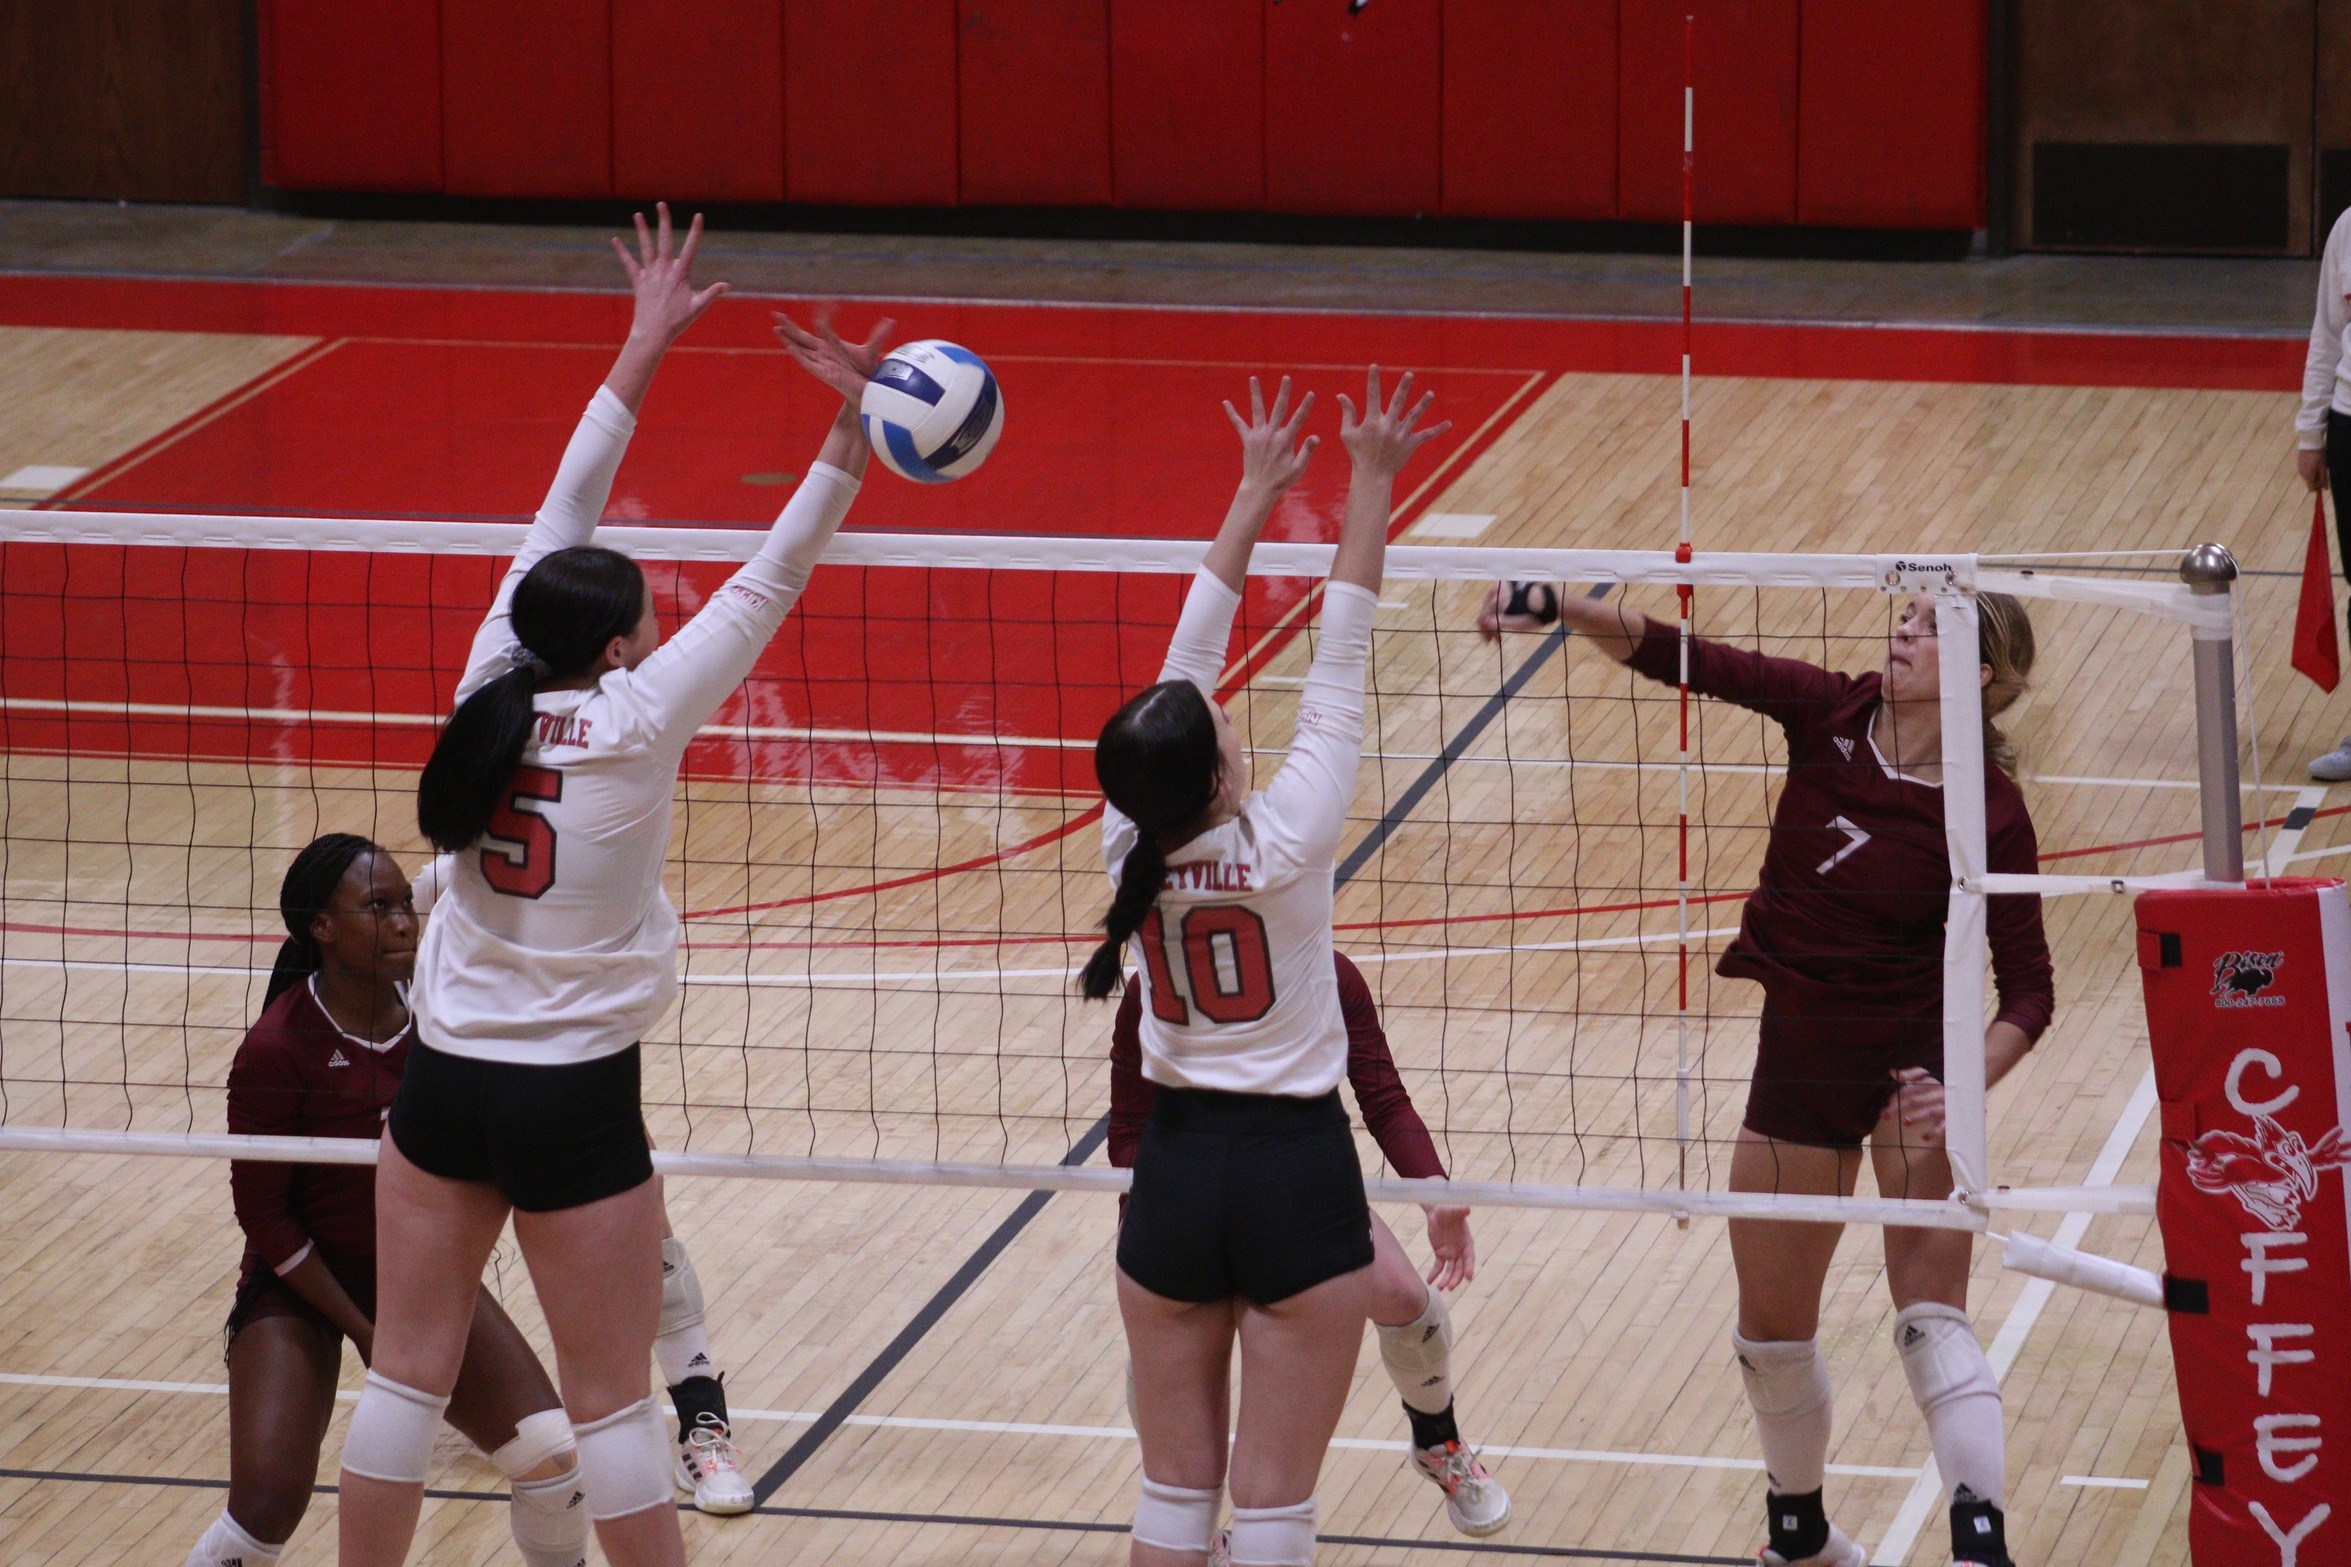 Raven Volleyball Ends Regular Season With 3-1 Defeat of Fort Scott, Qualifies for Postseason